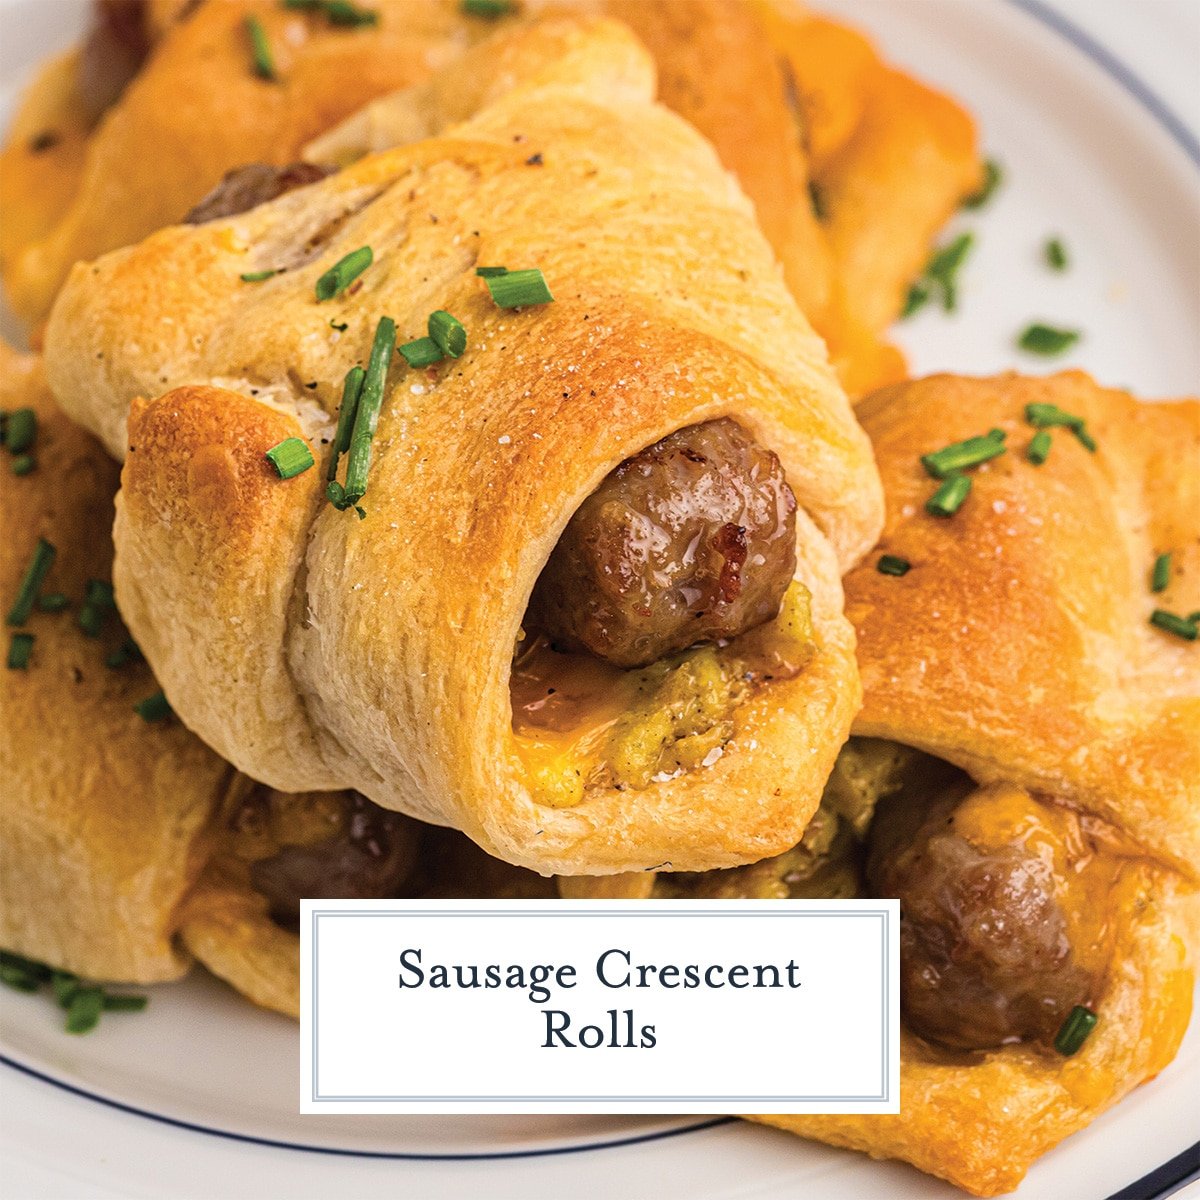 sausage crescent rolls with text overlay